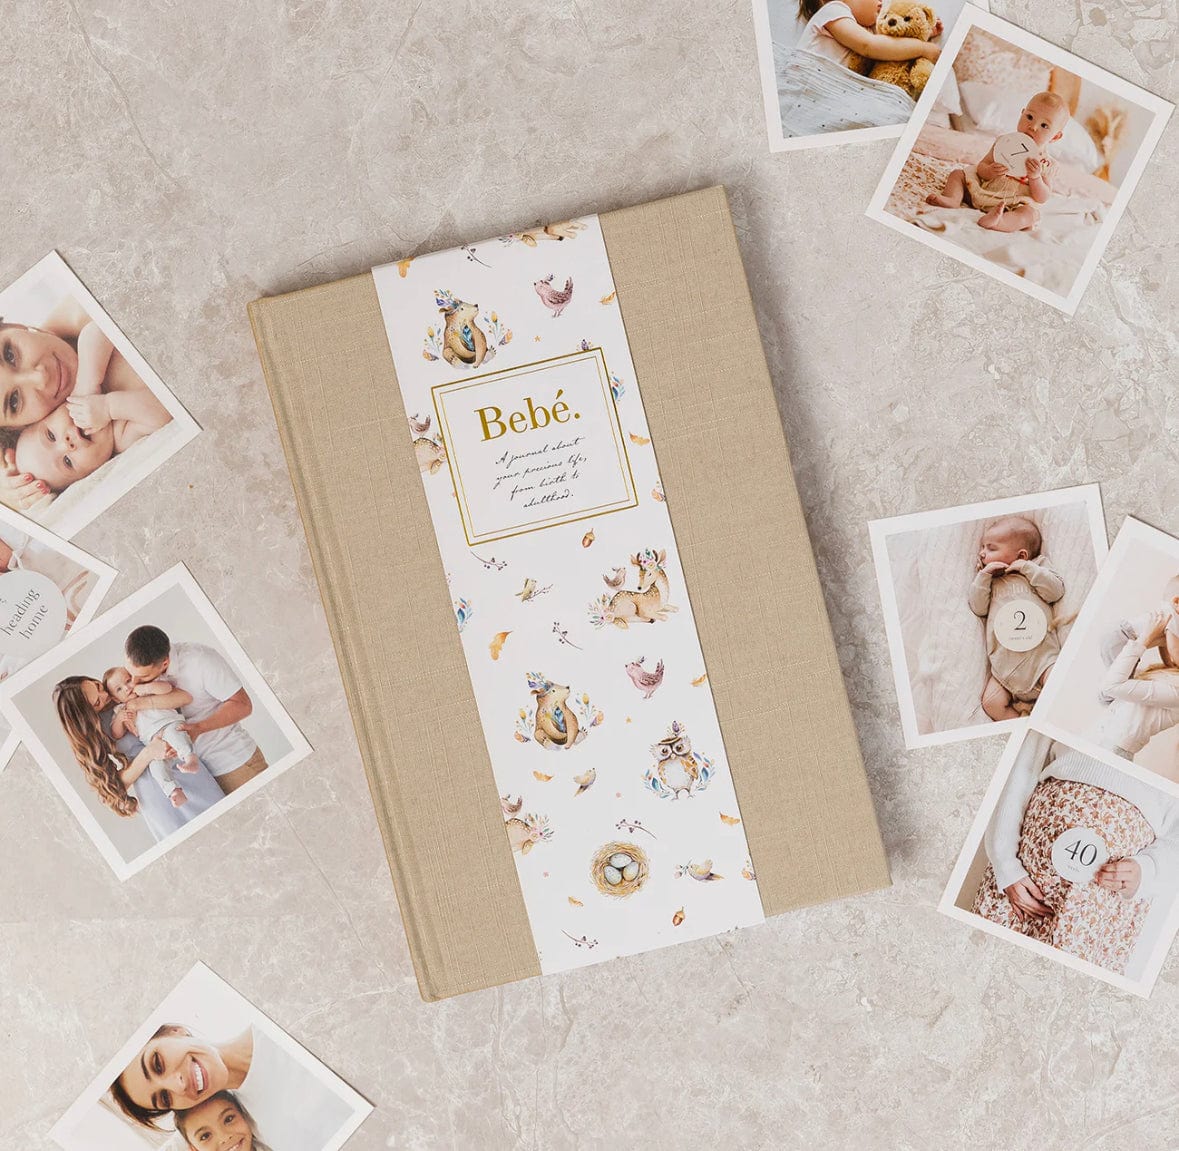 Bebe Baby Book with Keepsake Box and Pen in 3 Colours by Truly Amor